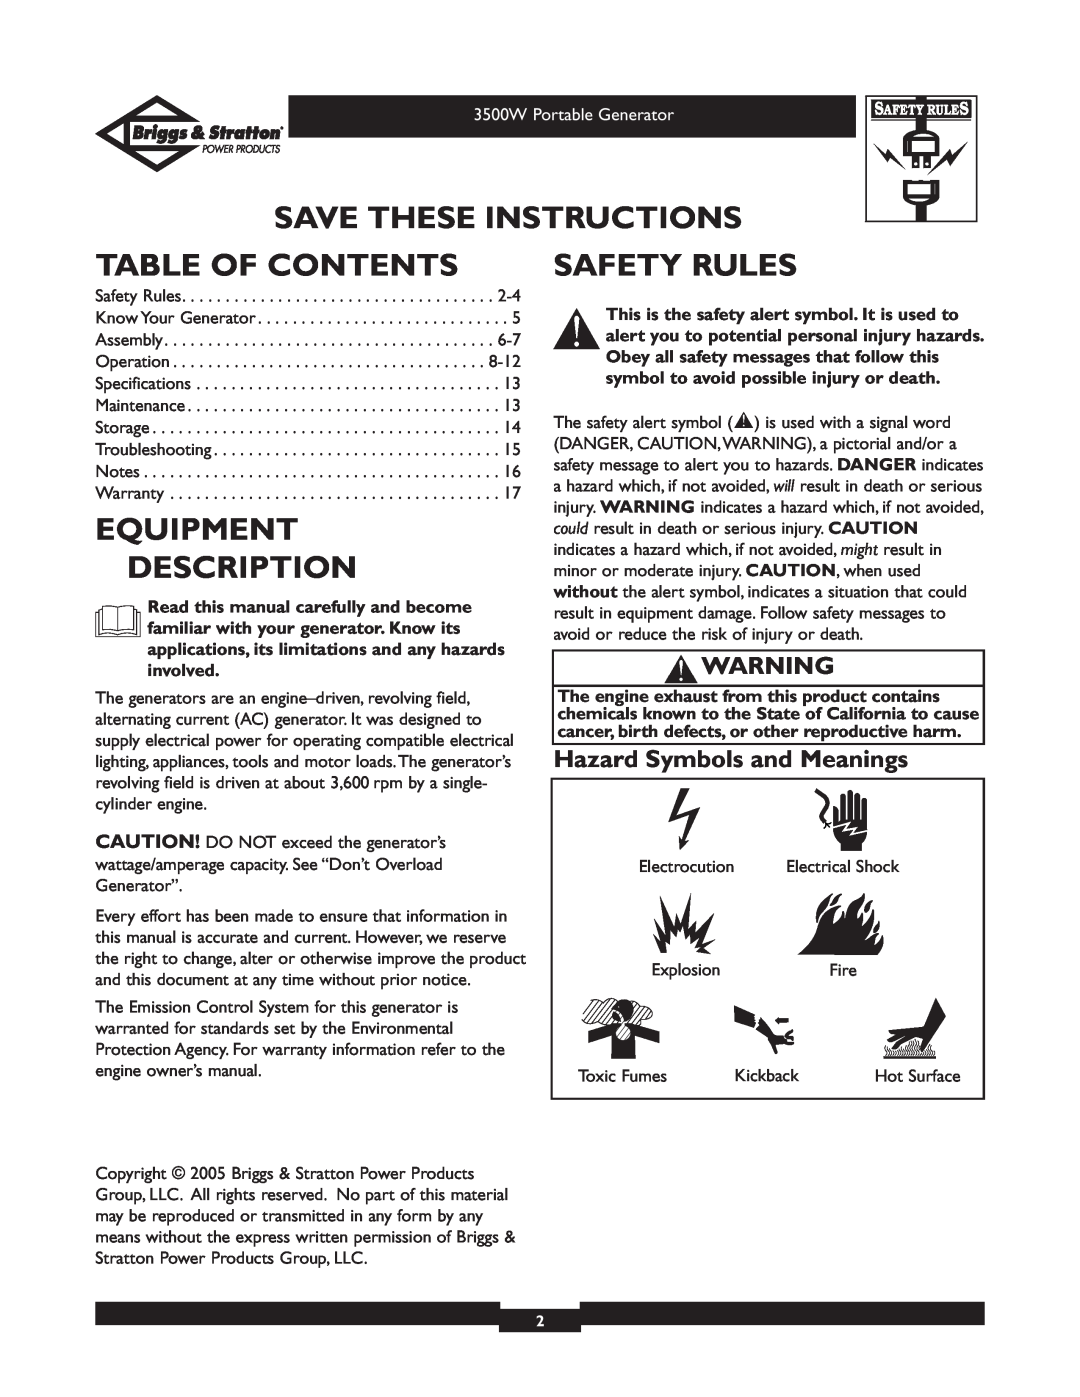 Briggs & Stratton 30208 owner manual Save These Instructions, Table Of Contents, Equipment Description, Safety Rules 